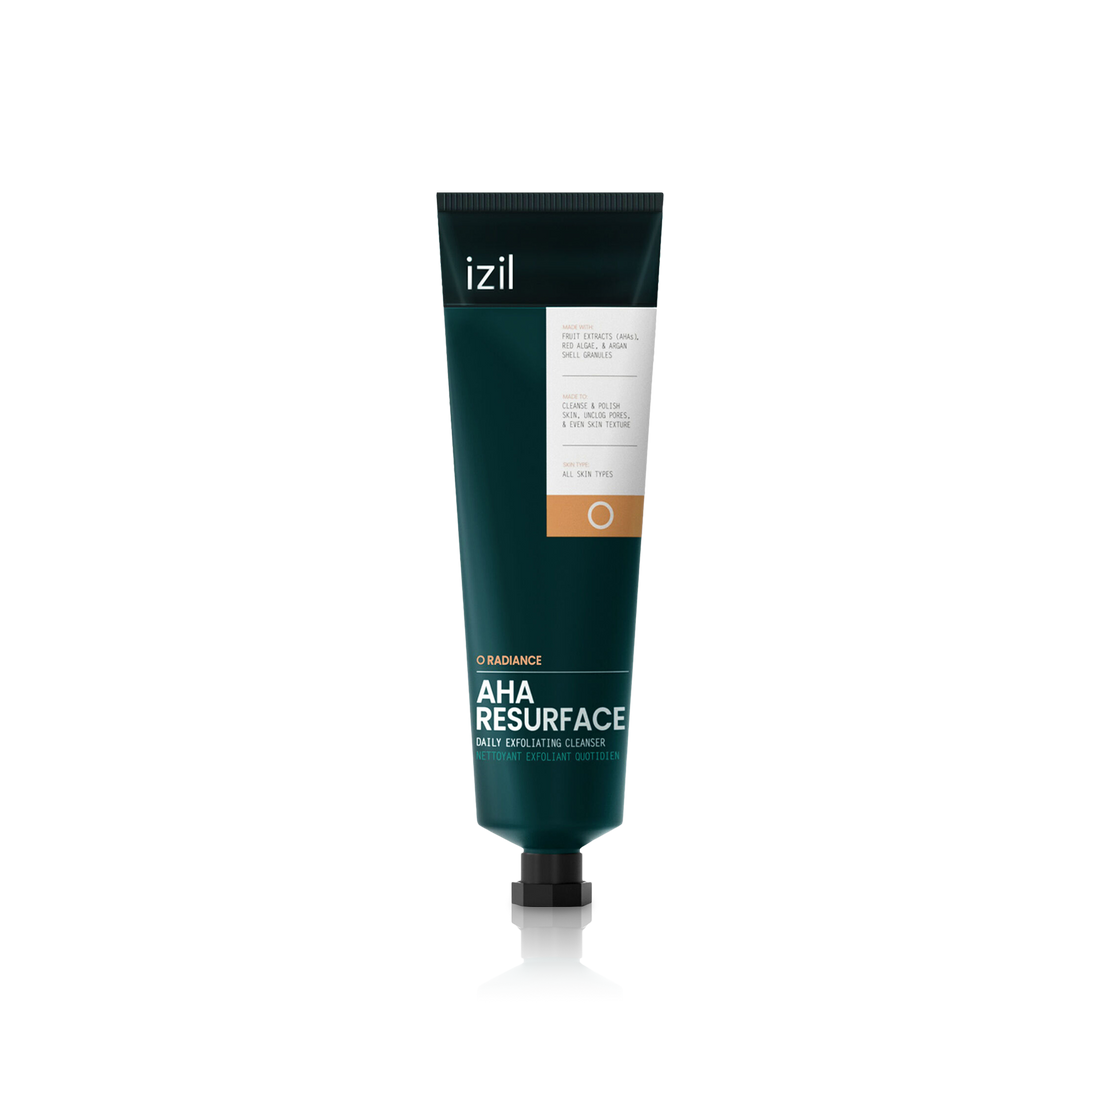 AHA Resurface Daily Exfoliating Cleanser